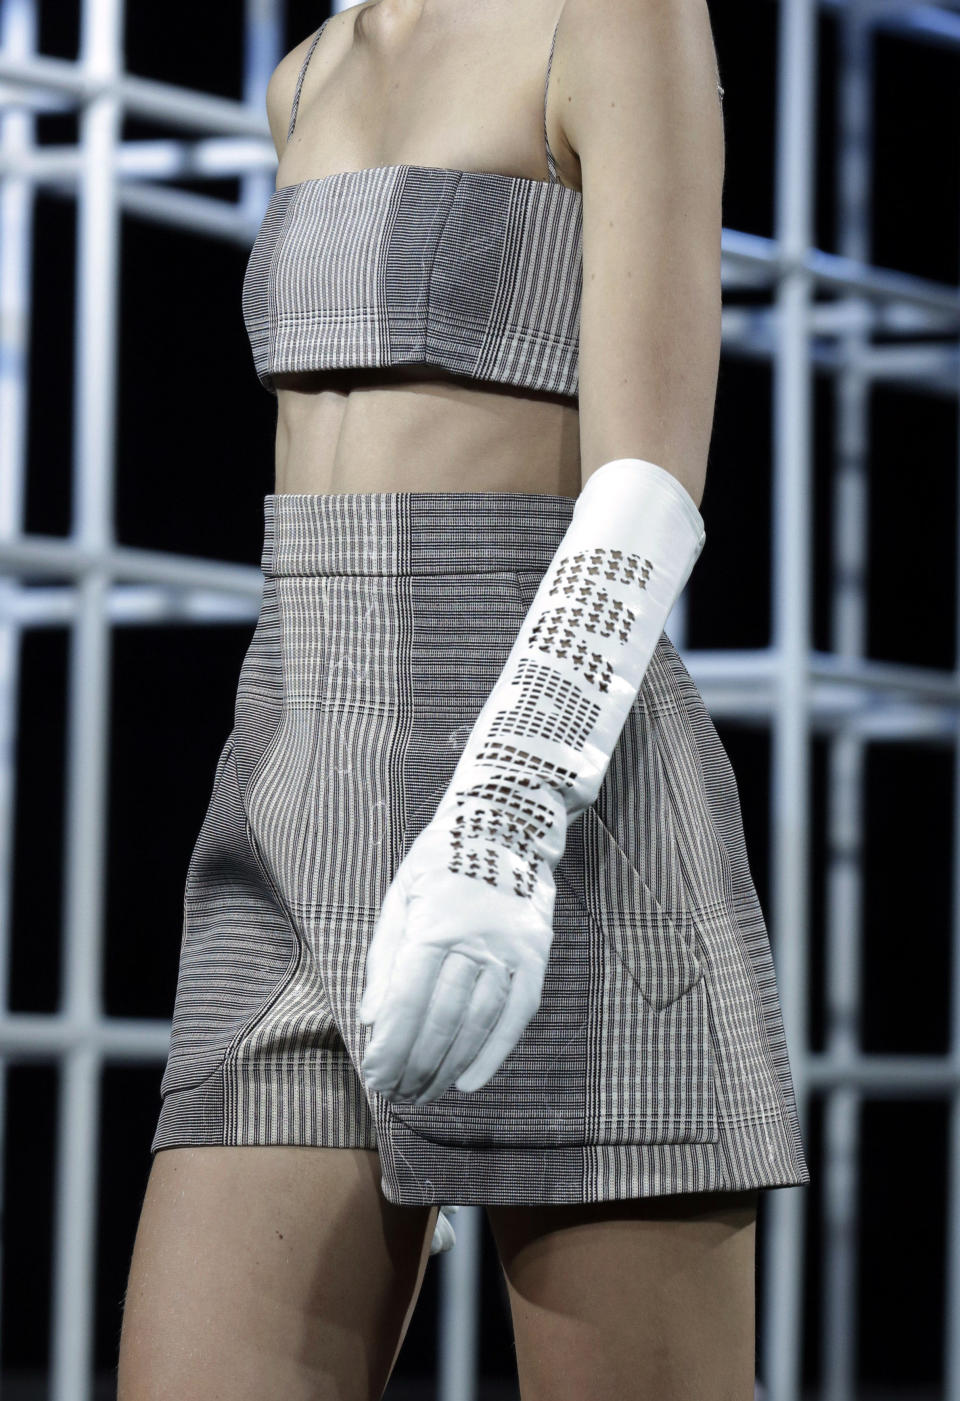 The Alexander Wang Spring 2014 collection is modeled during Fashion Week in New York, Saturday, Sept. 7, 2013. (AP Photo/Richard Drew)